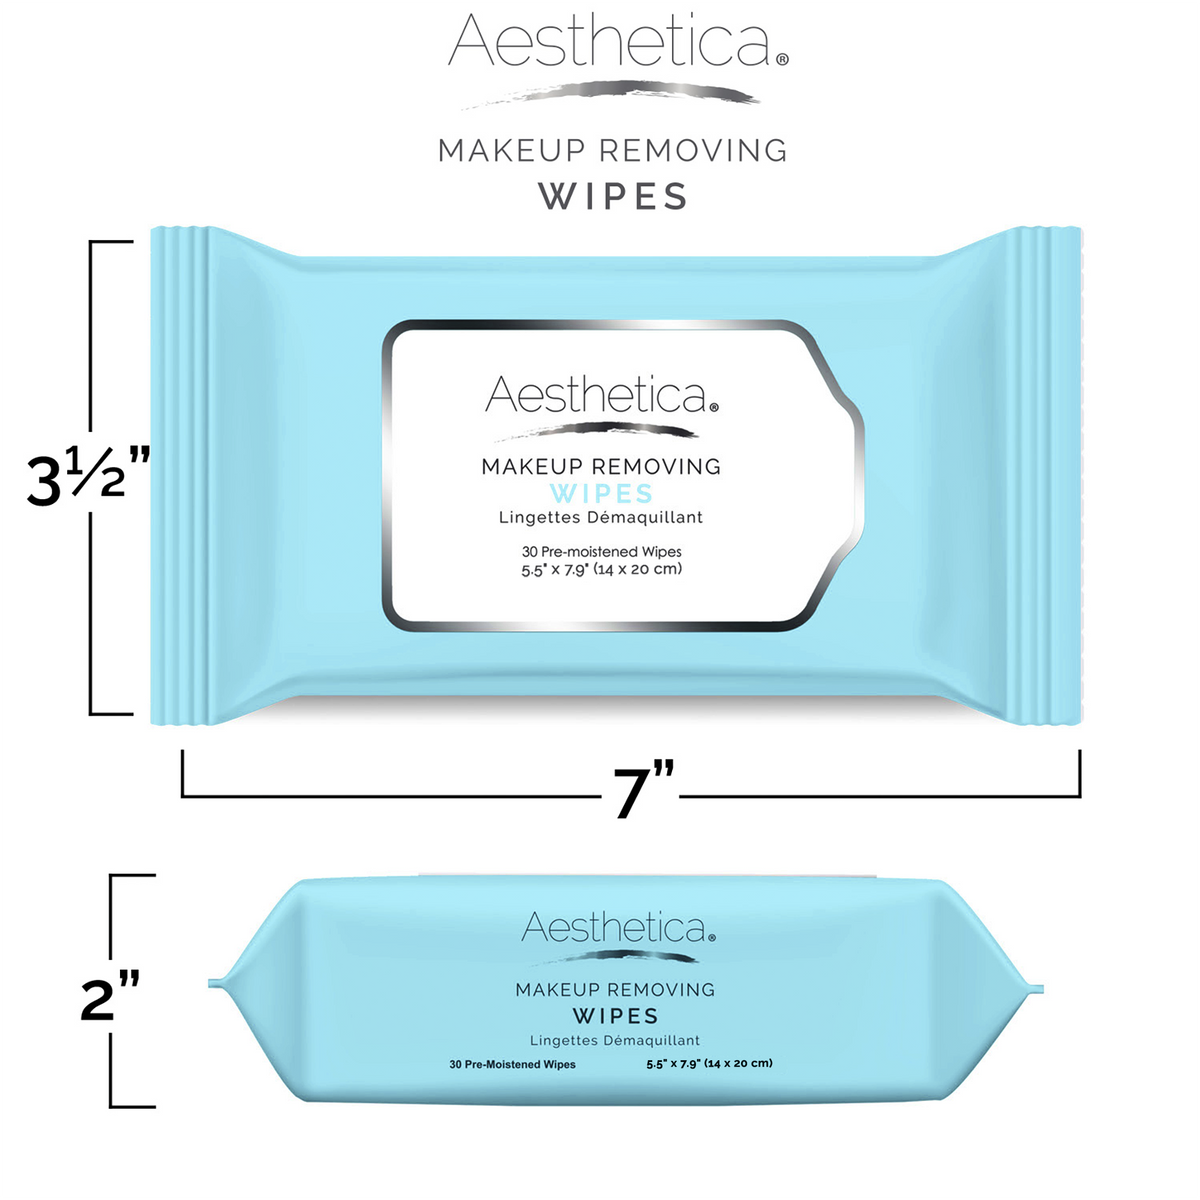 Aesthetica Makeup Removing Wipes - 6 Pack